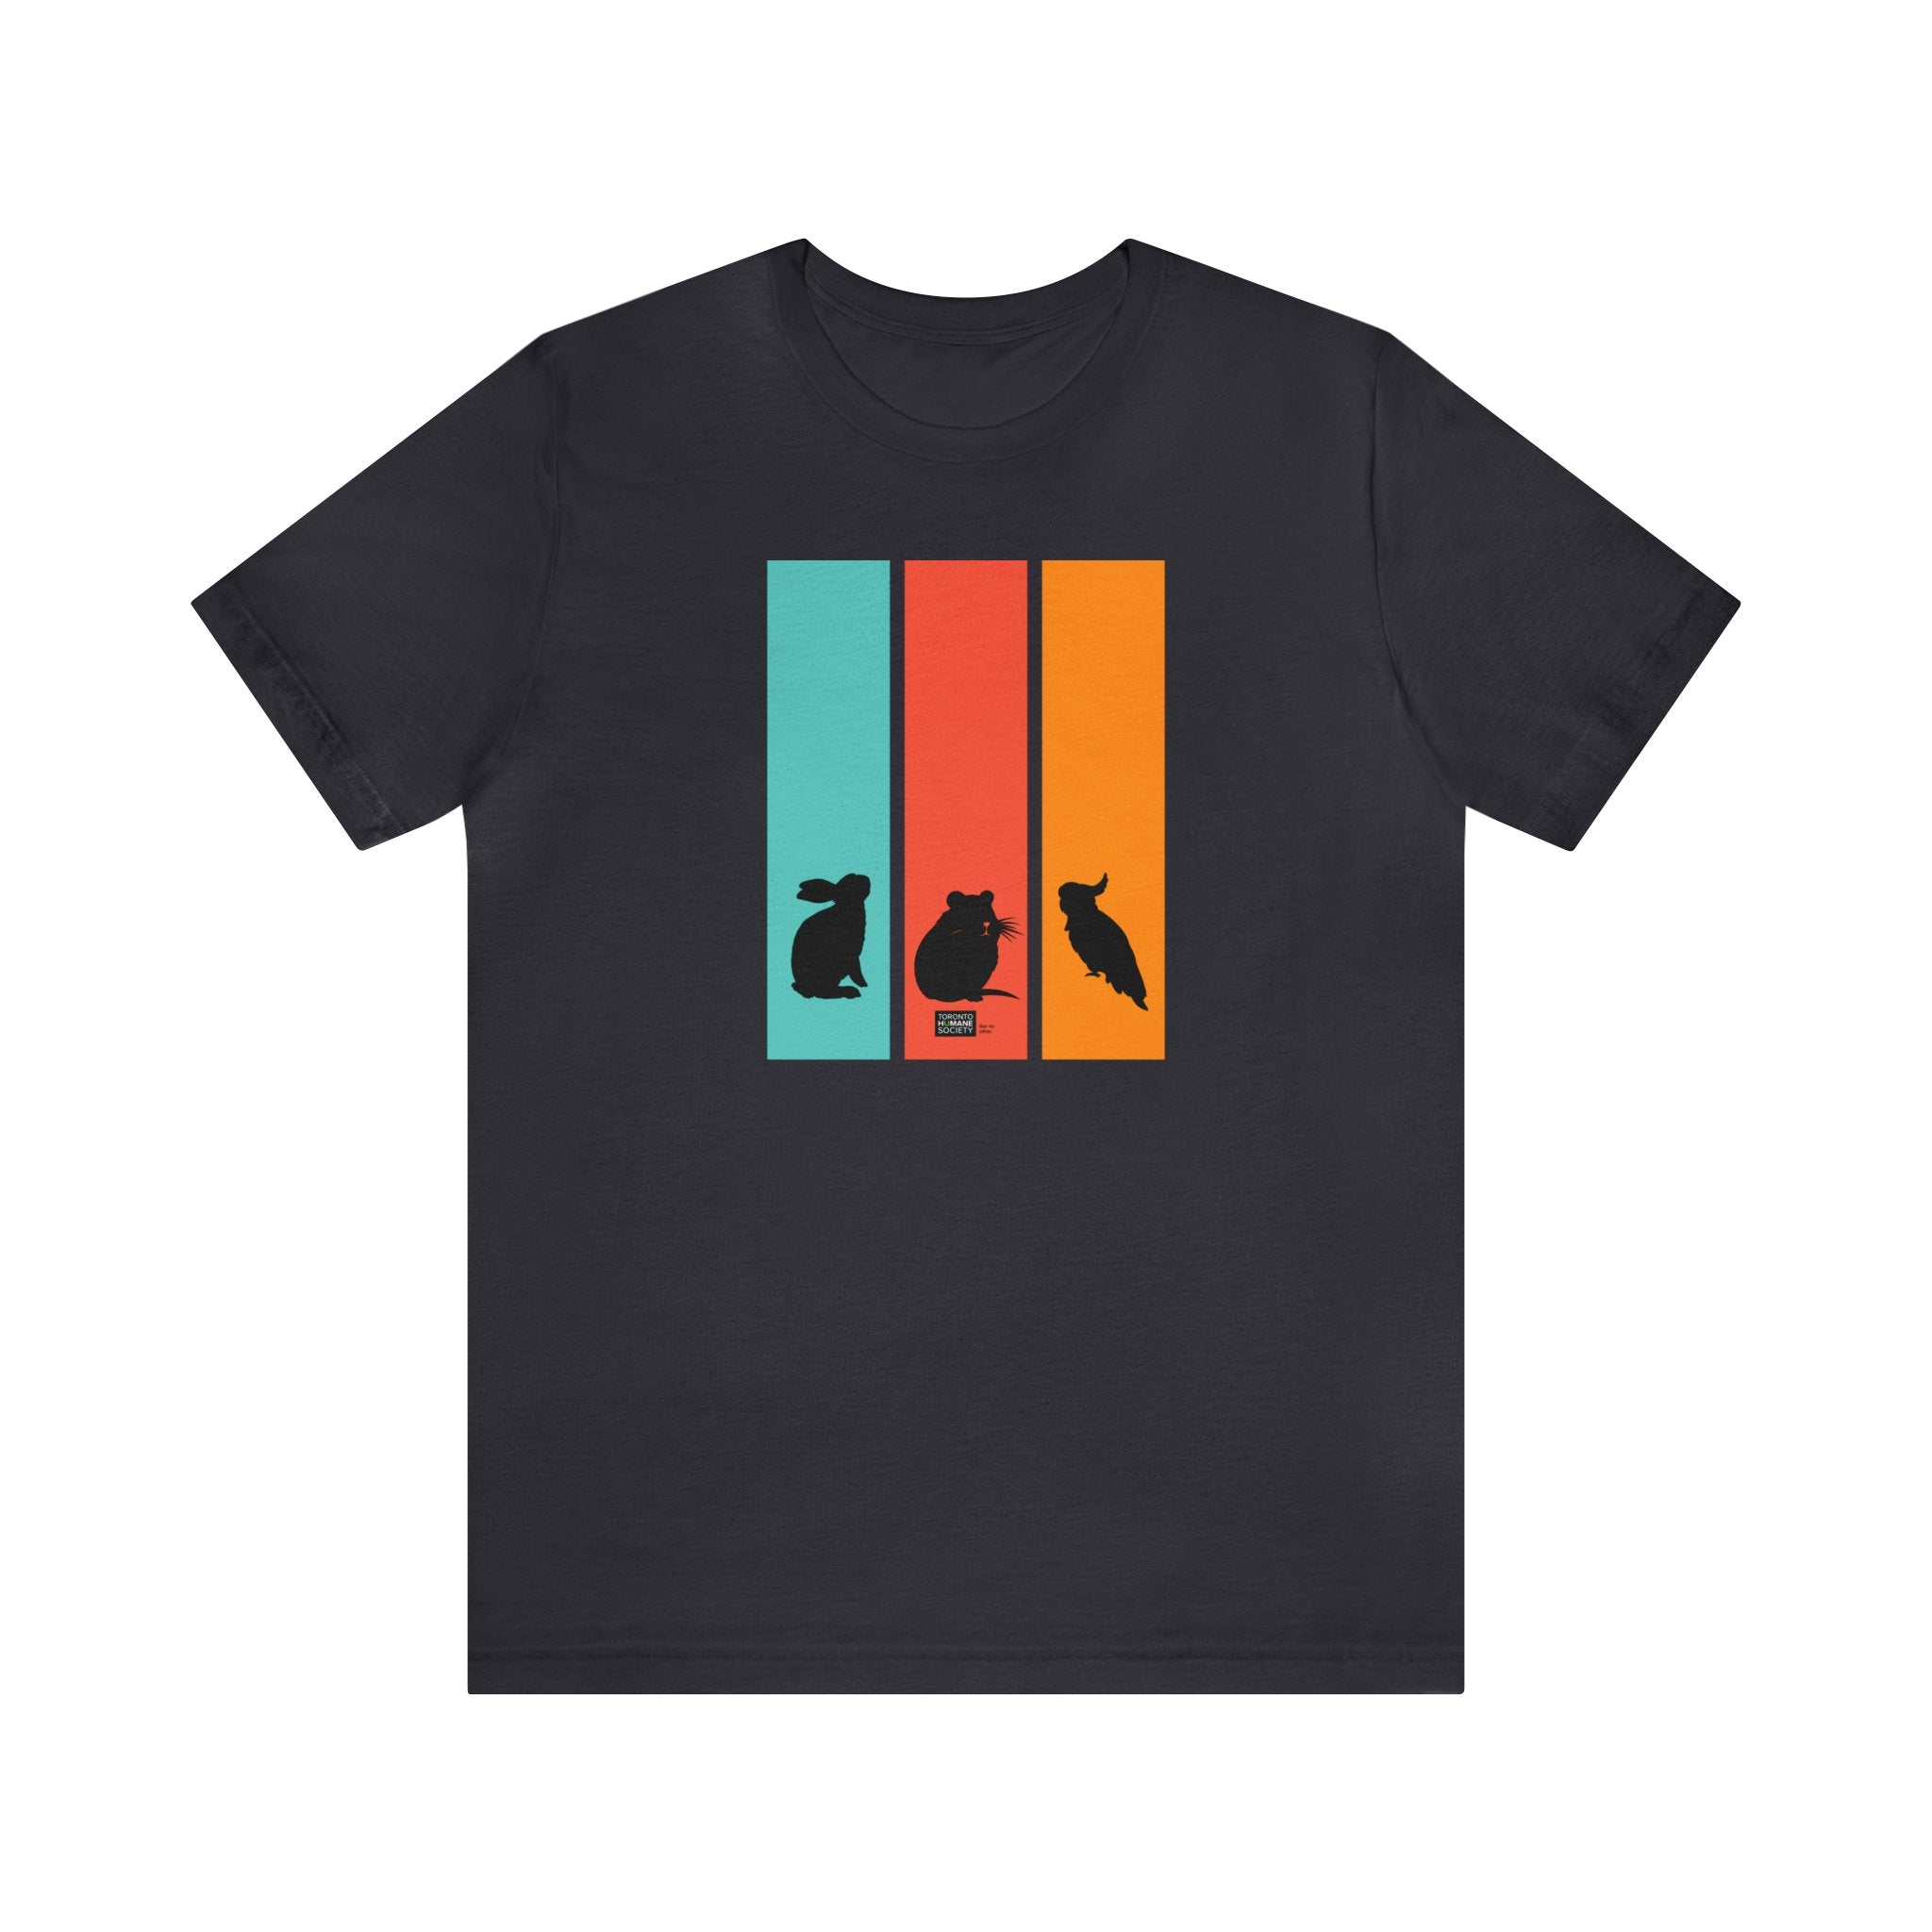 Unisex Jersey Tee - Special Species Silhouettes